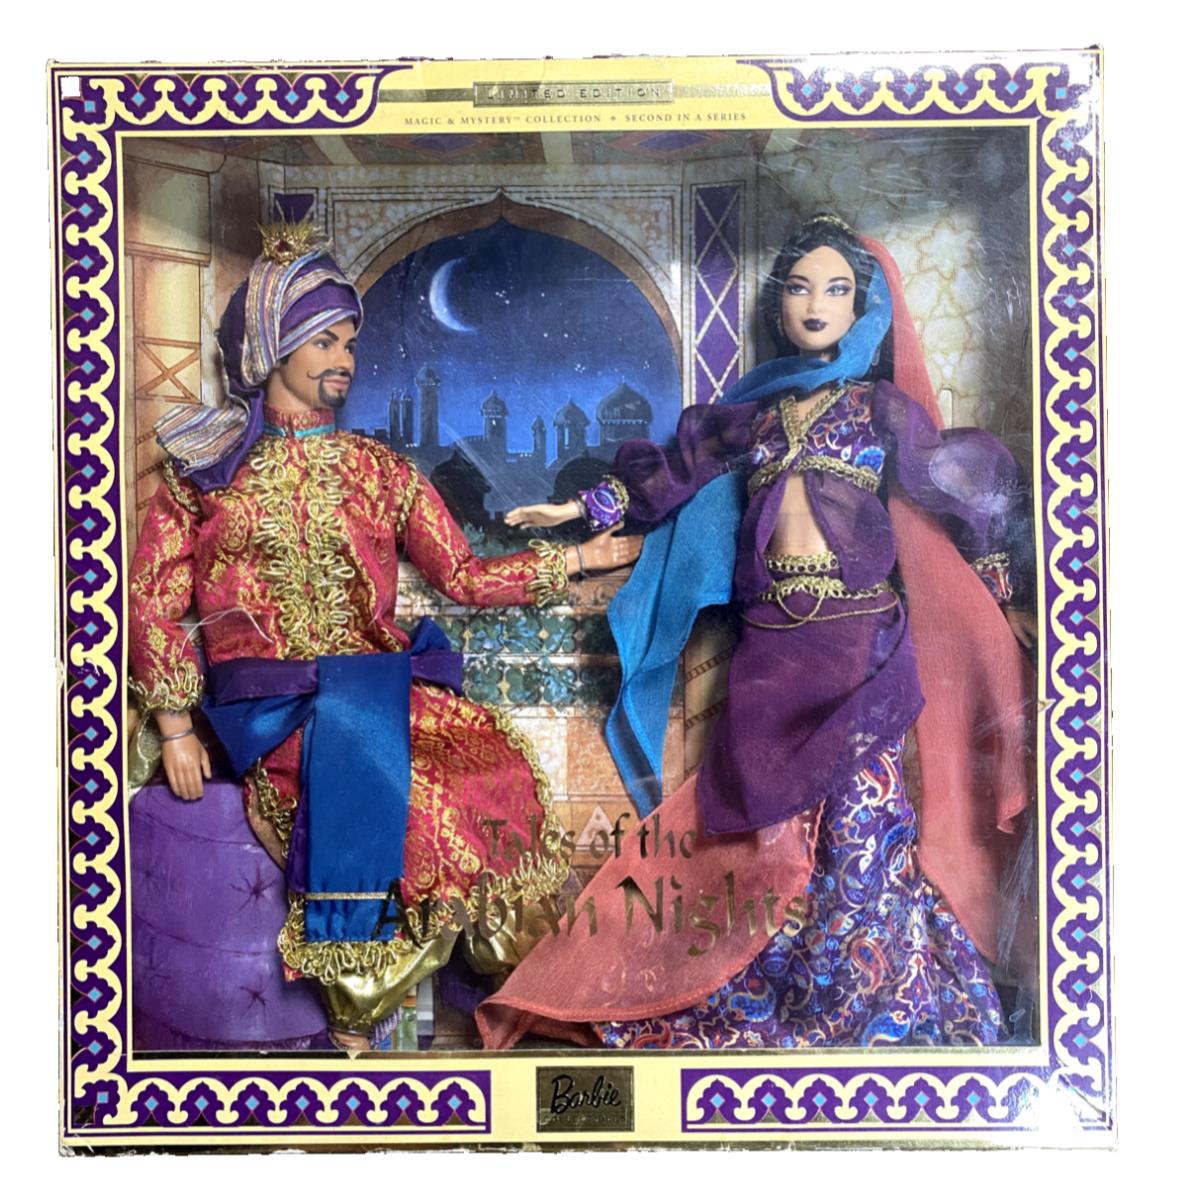 2001 Barbie and Ken Limited Edition Tale of The Arabian Nights Nrfb